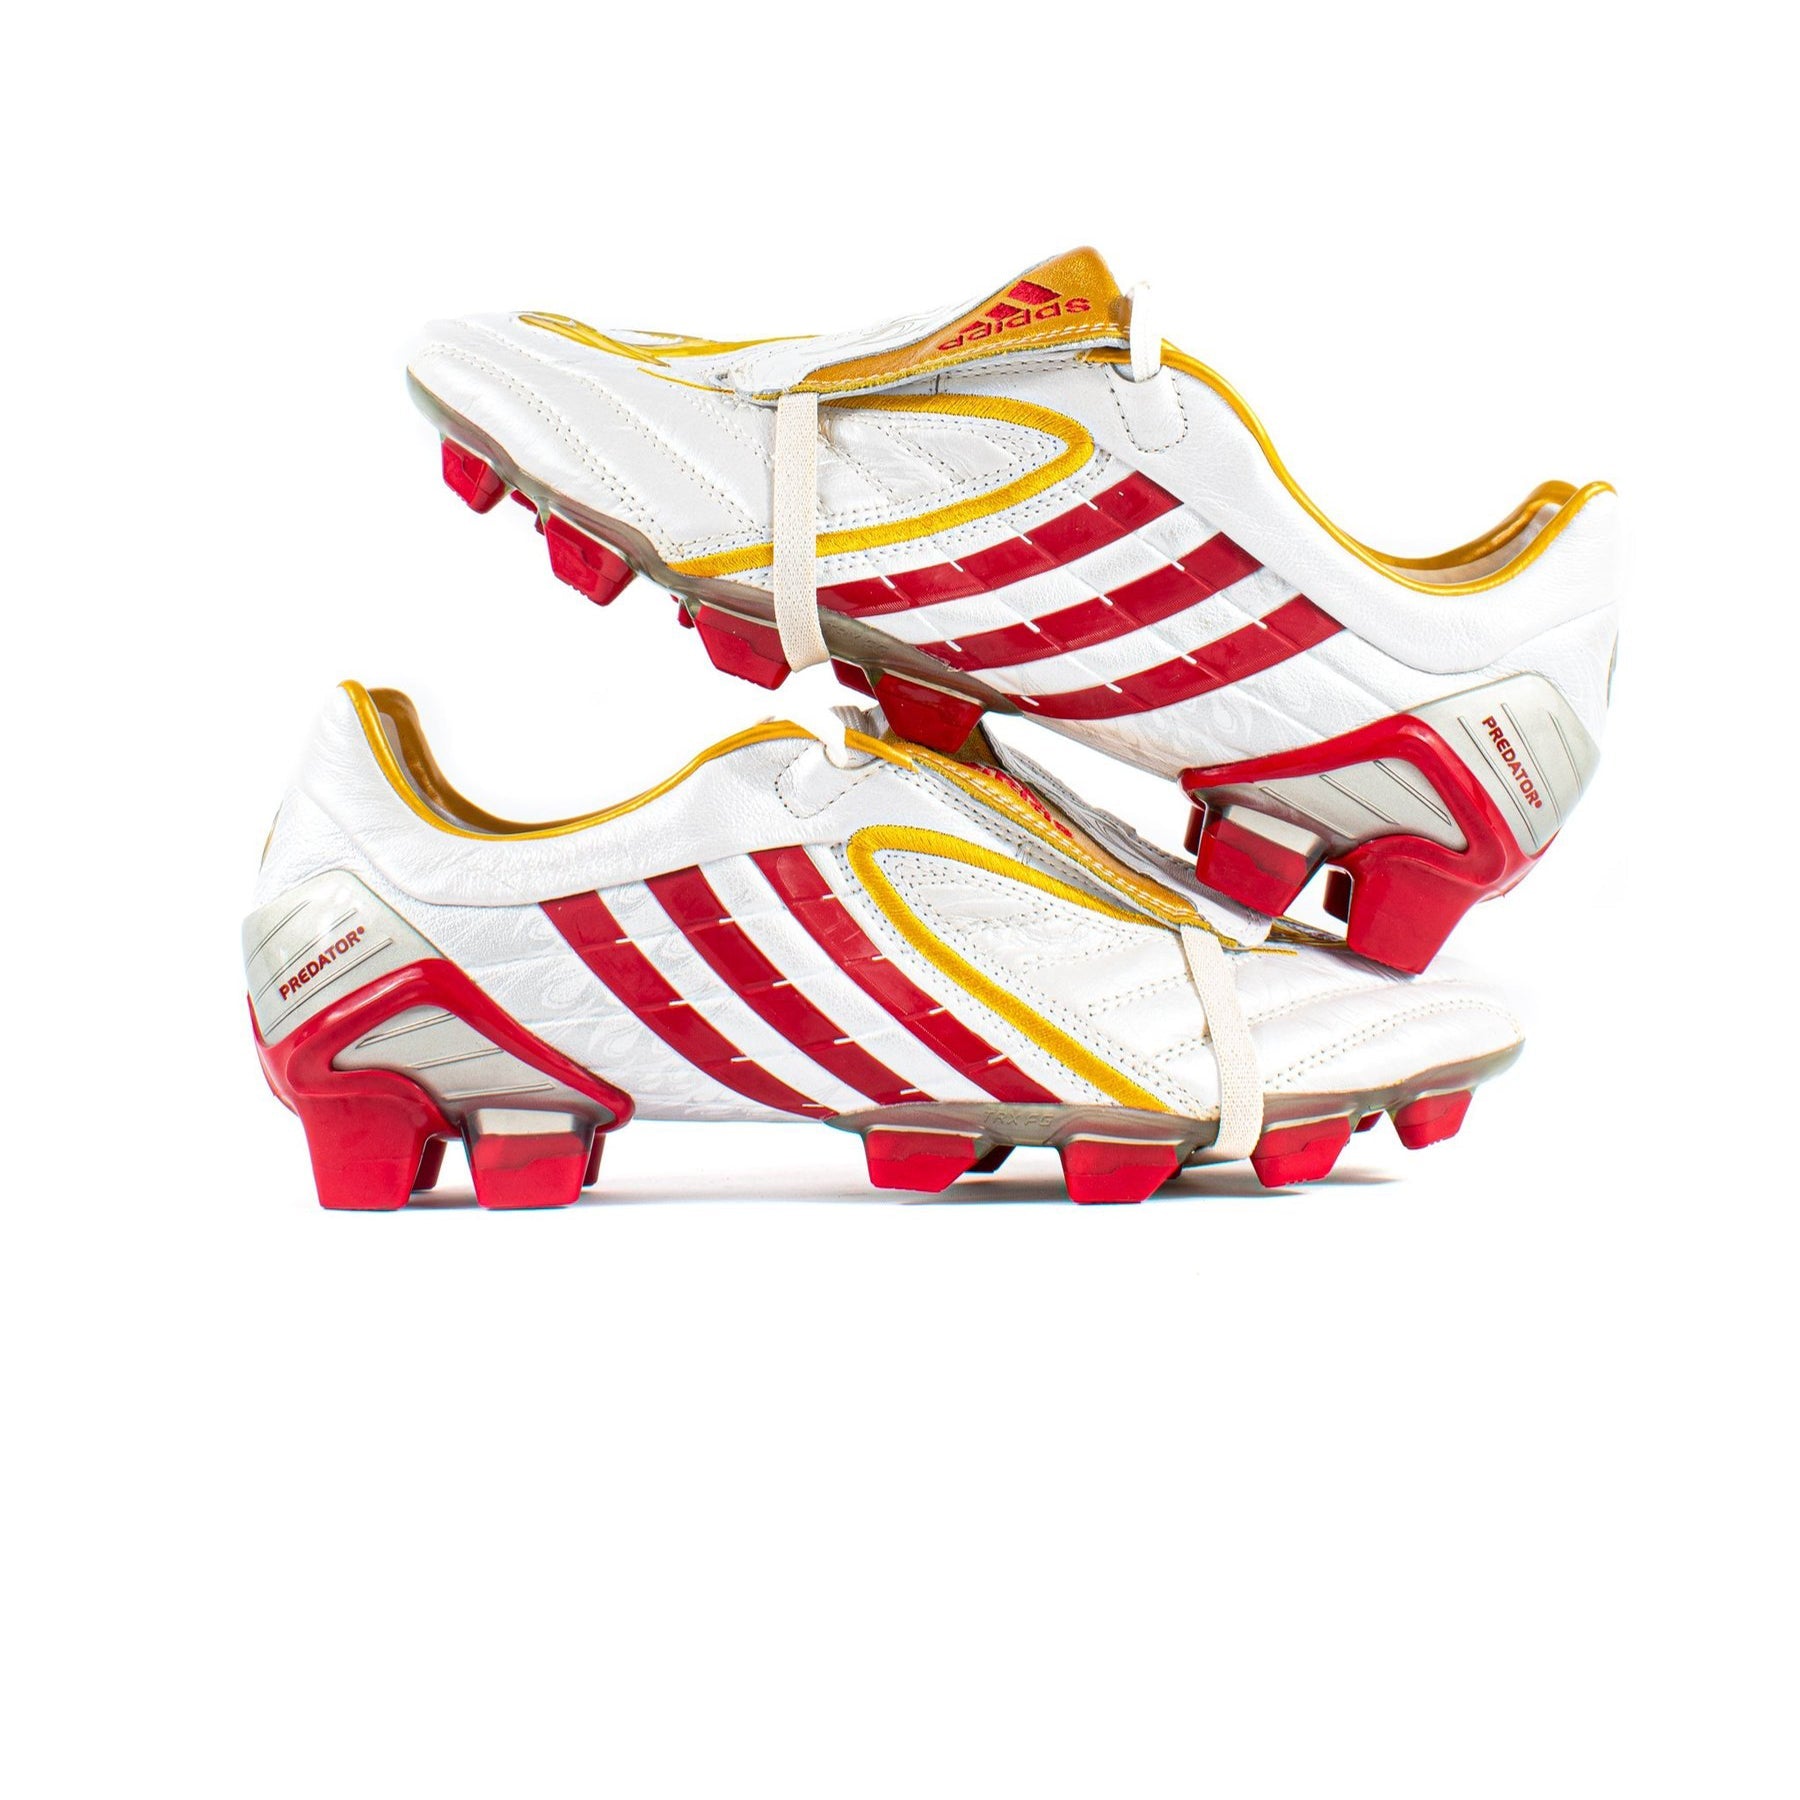 Adidas Powerswerve White Gold FG Classic Soccer